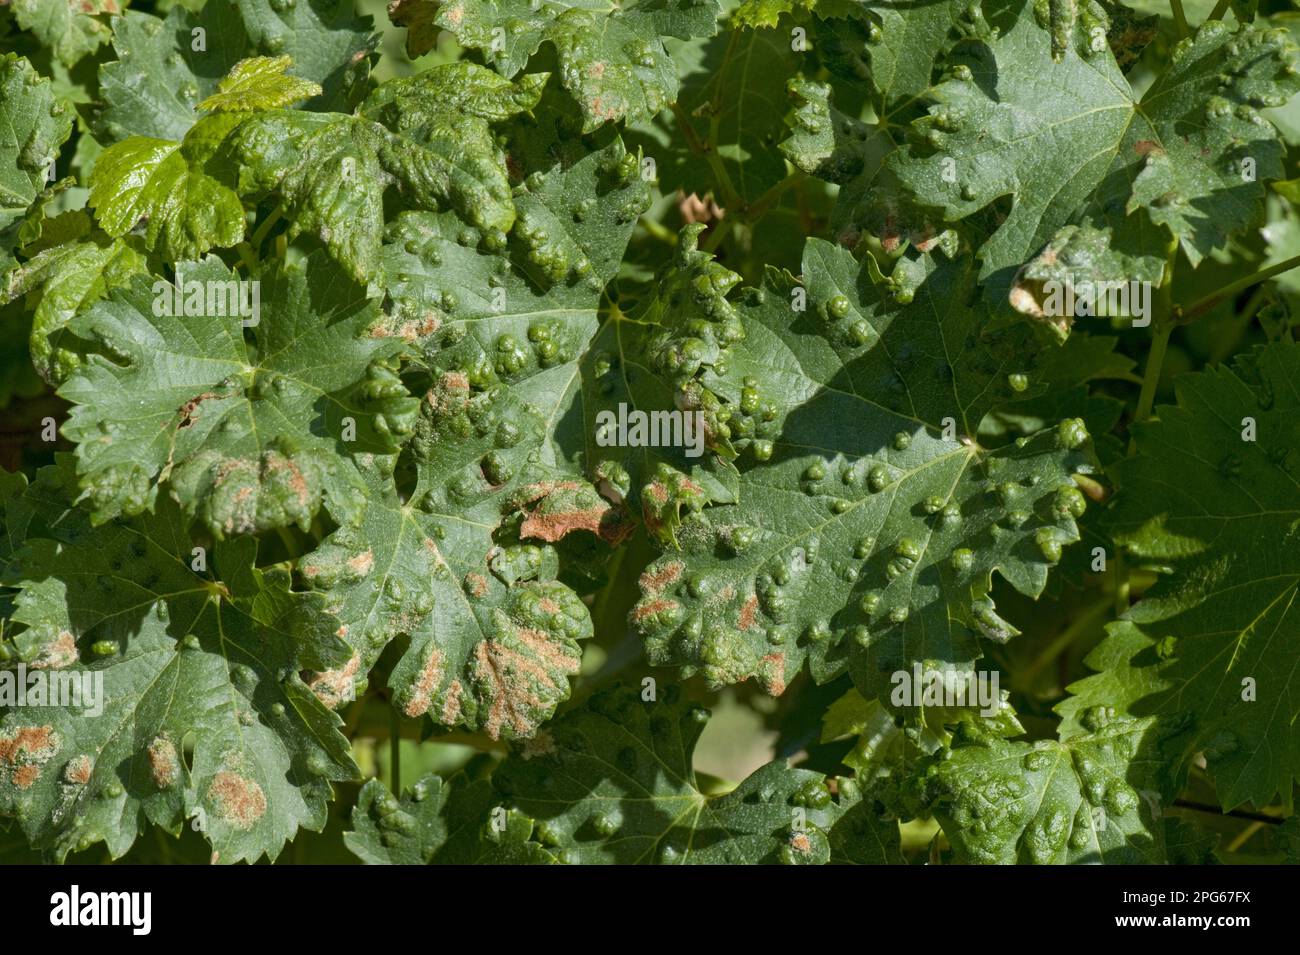 Grapevine blister mite (Colomerus vitis), damage blisters on the upper surface of vine leaves in France Stock Photo